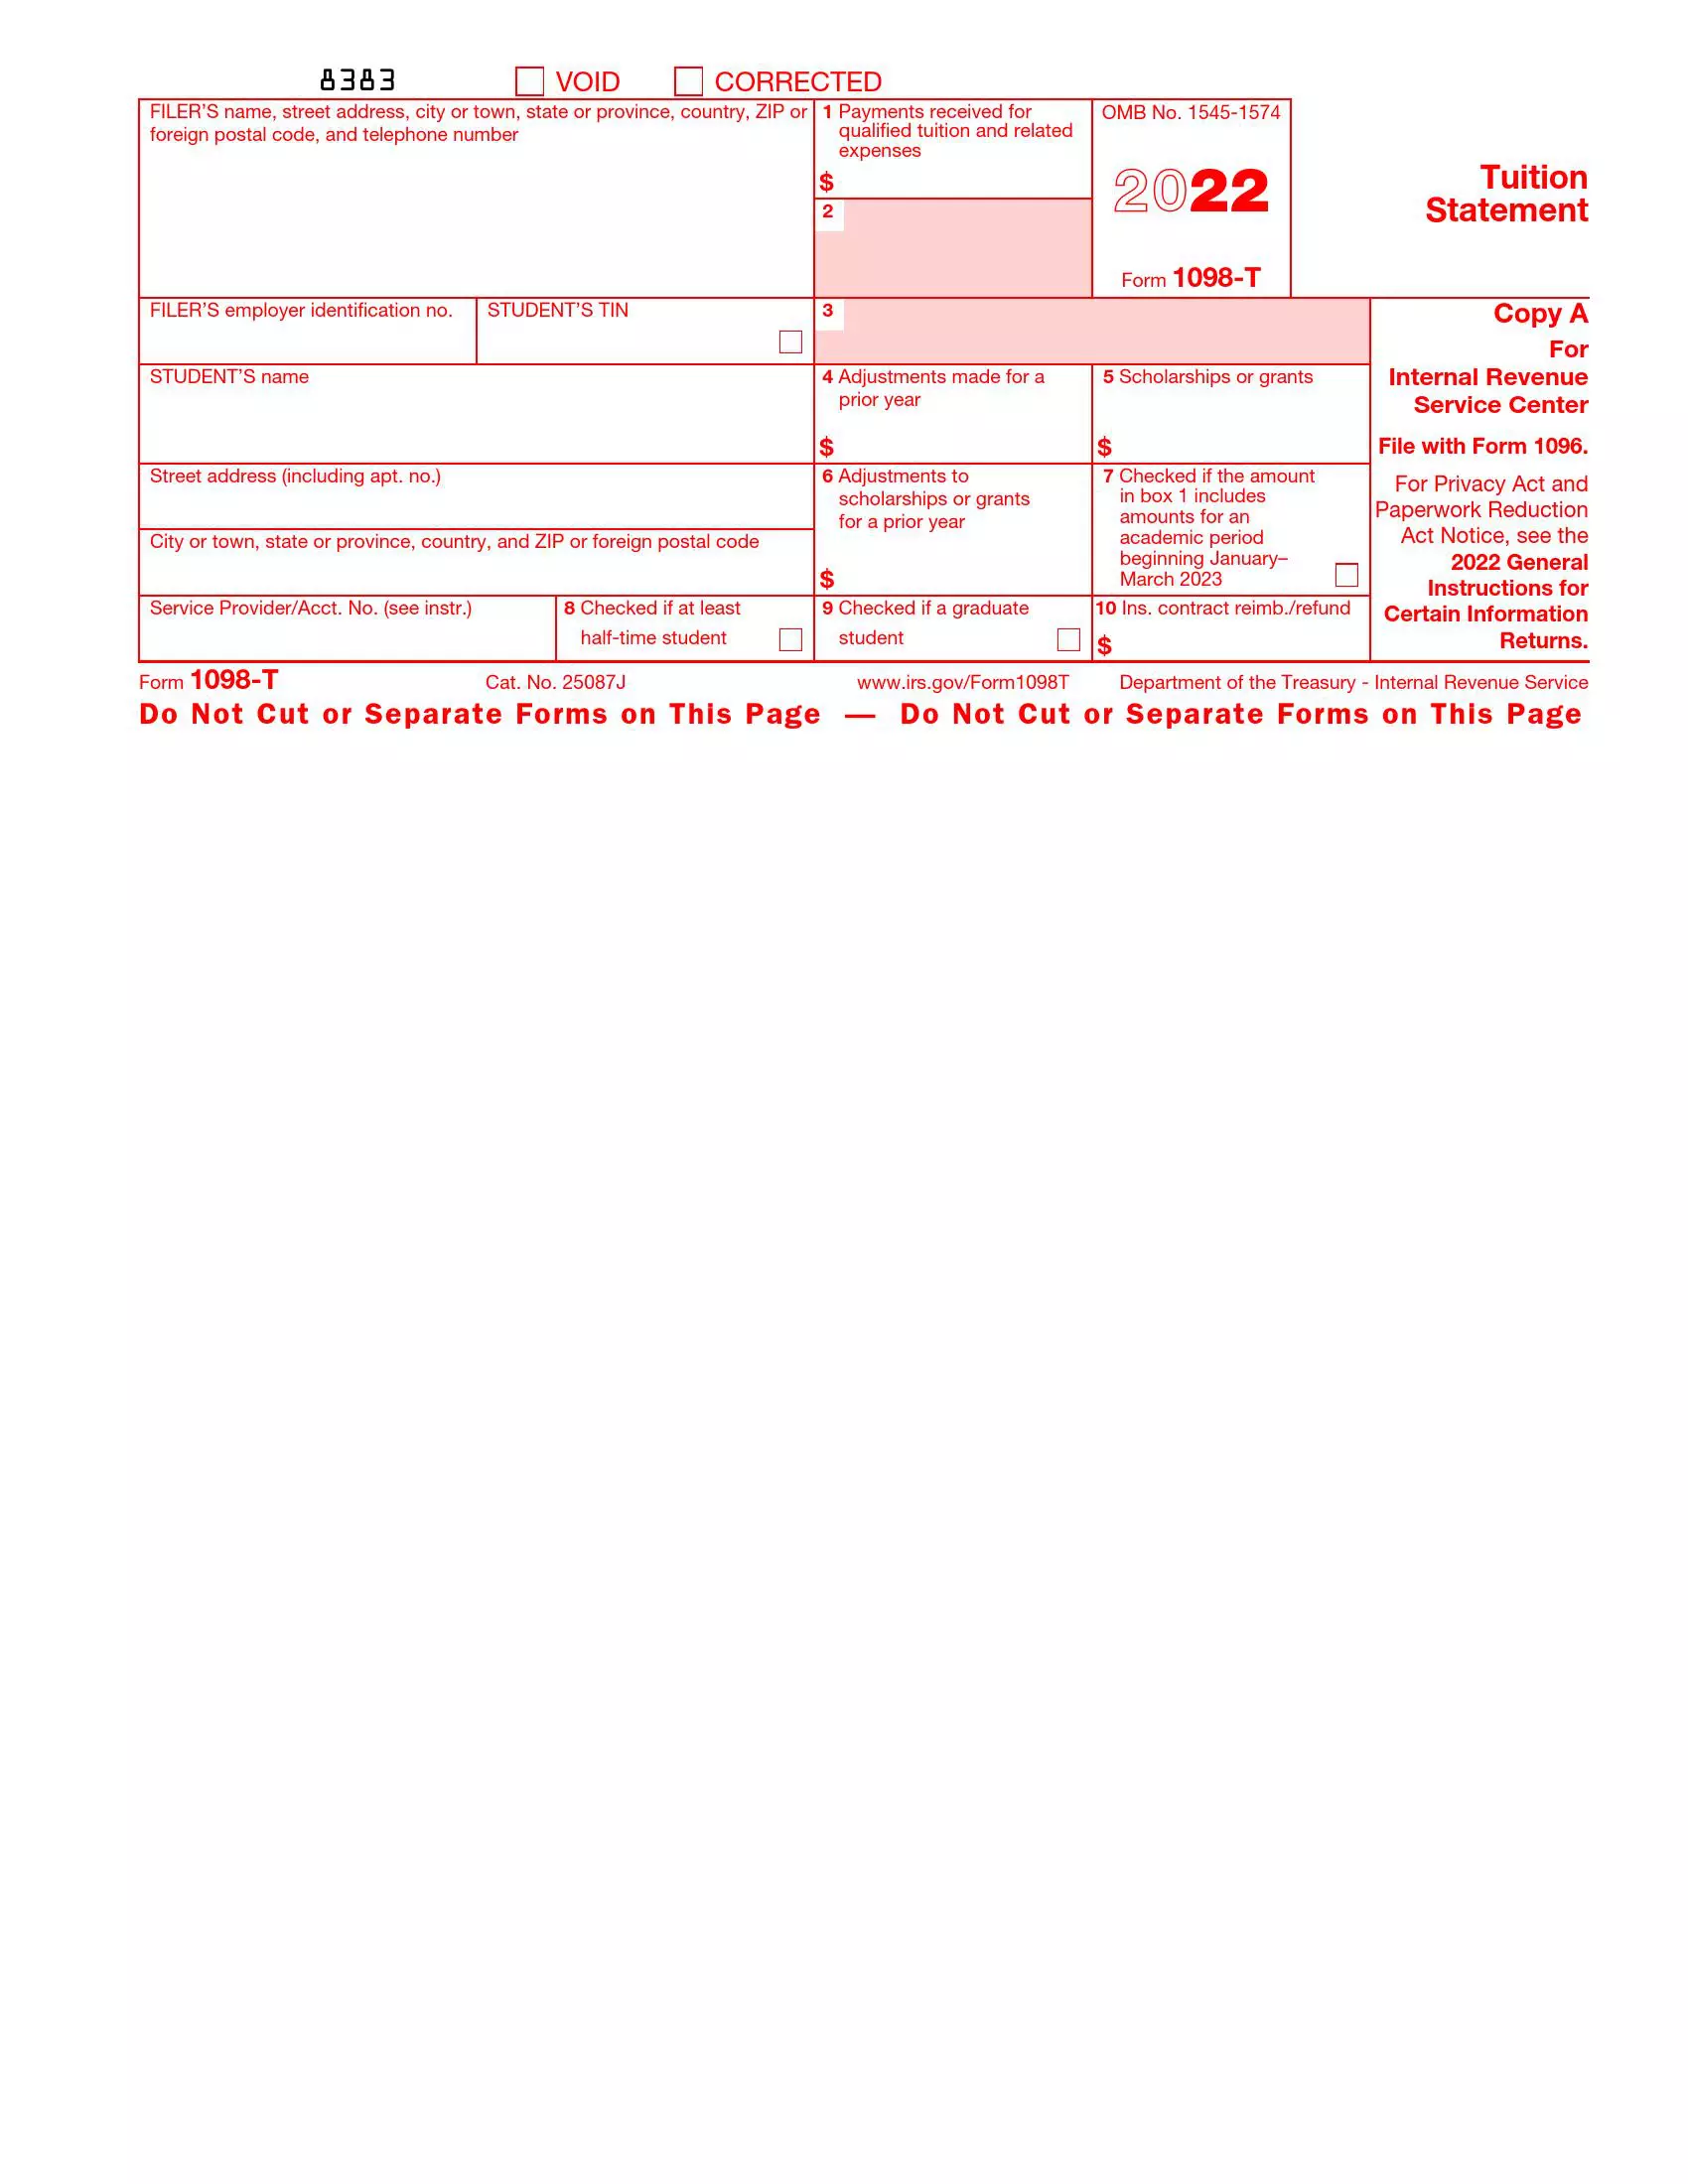 irs form 1098-t 2022 preview